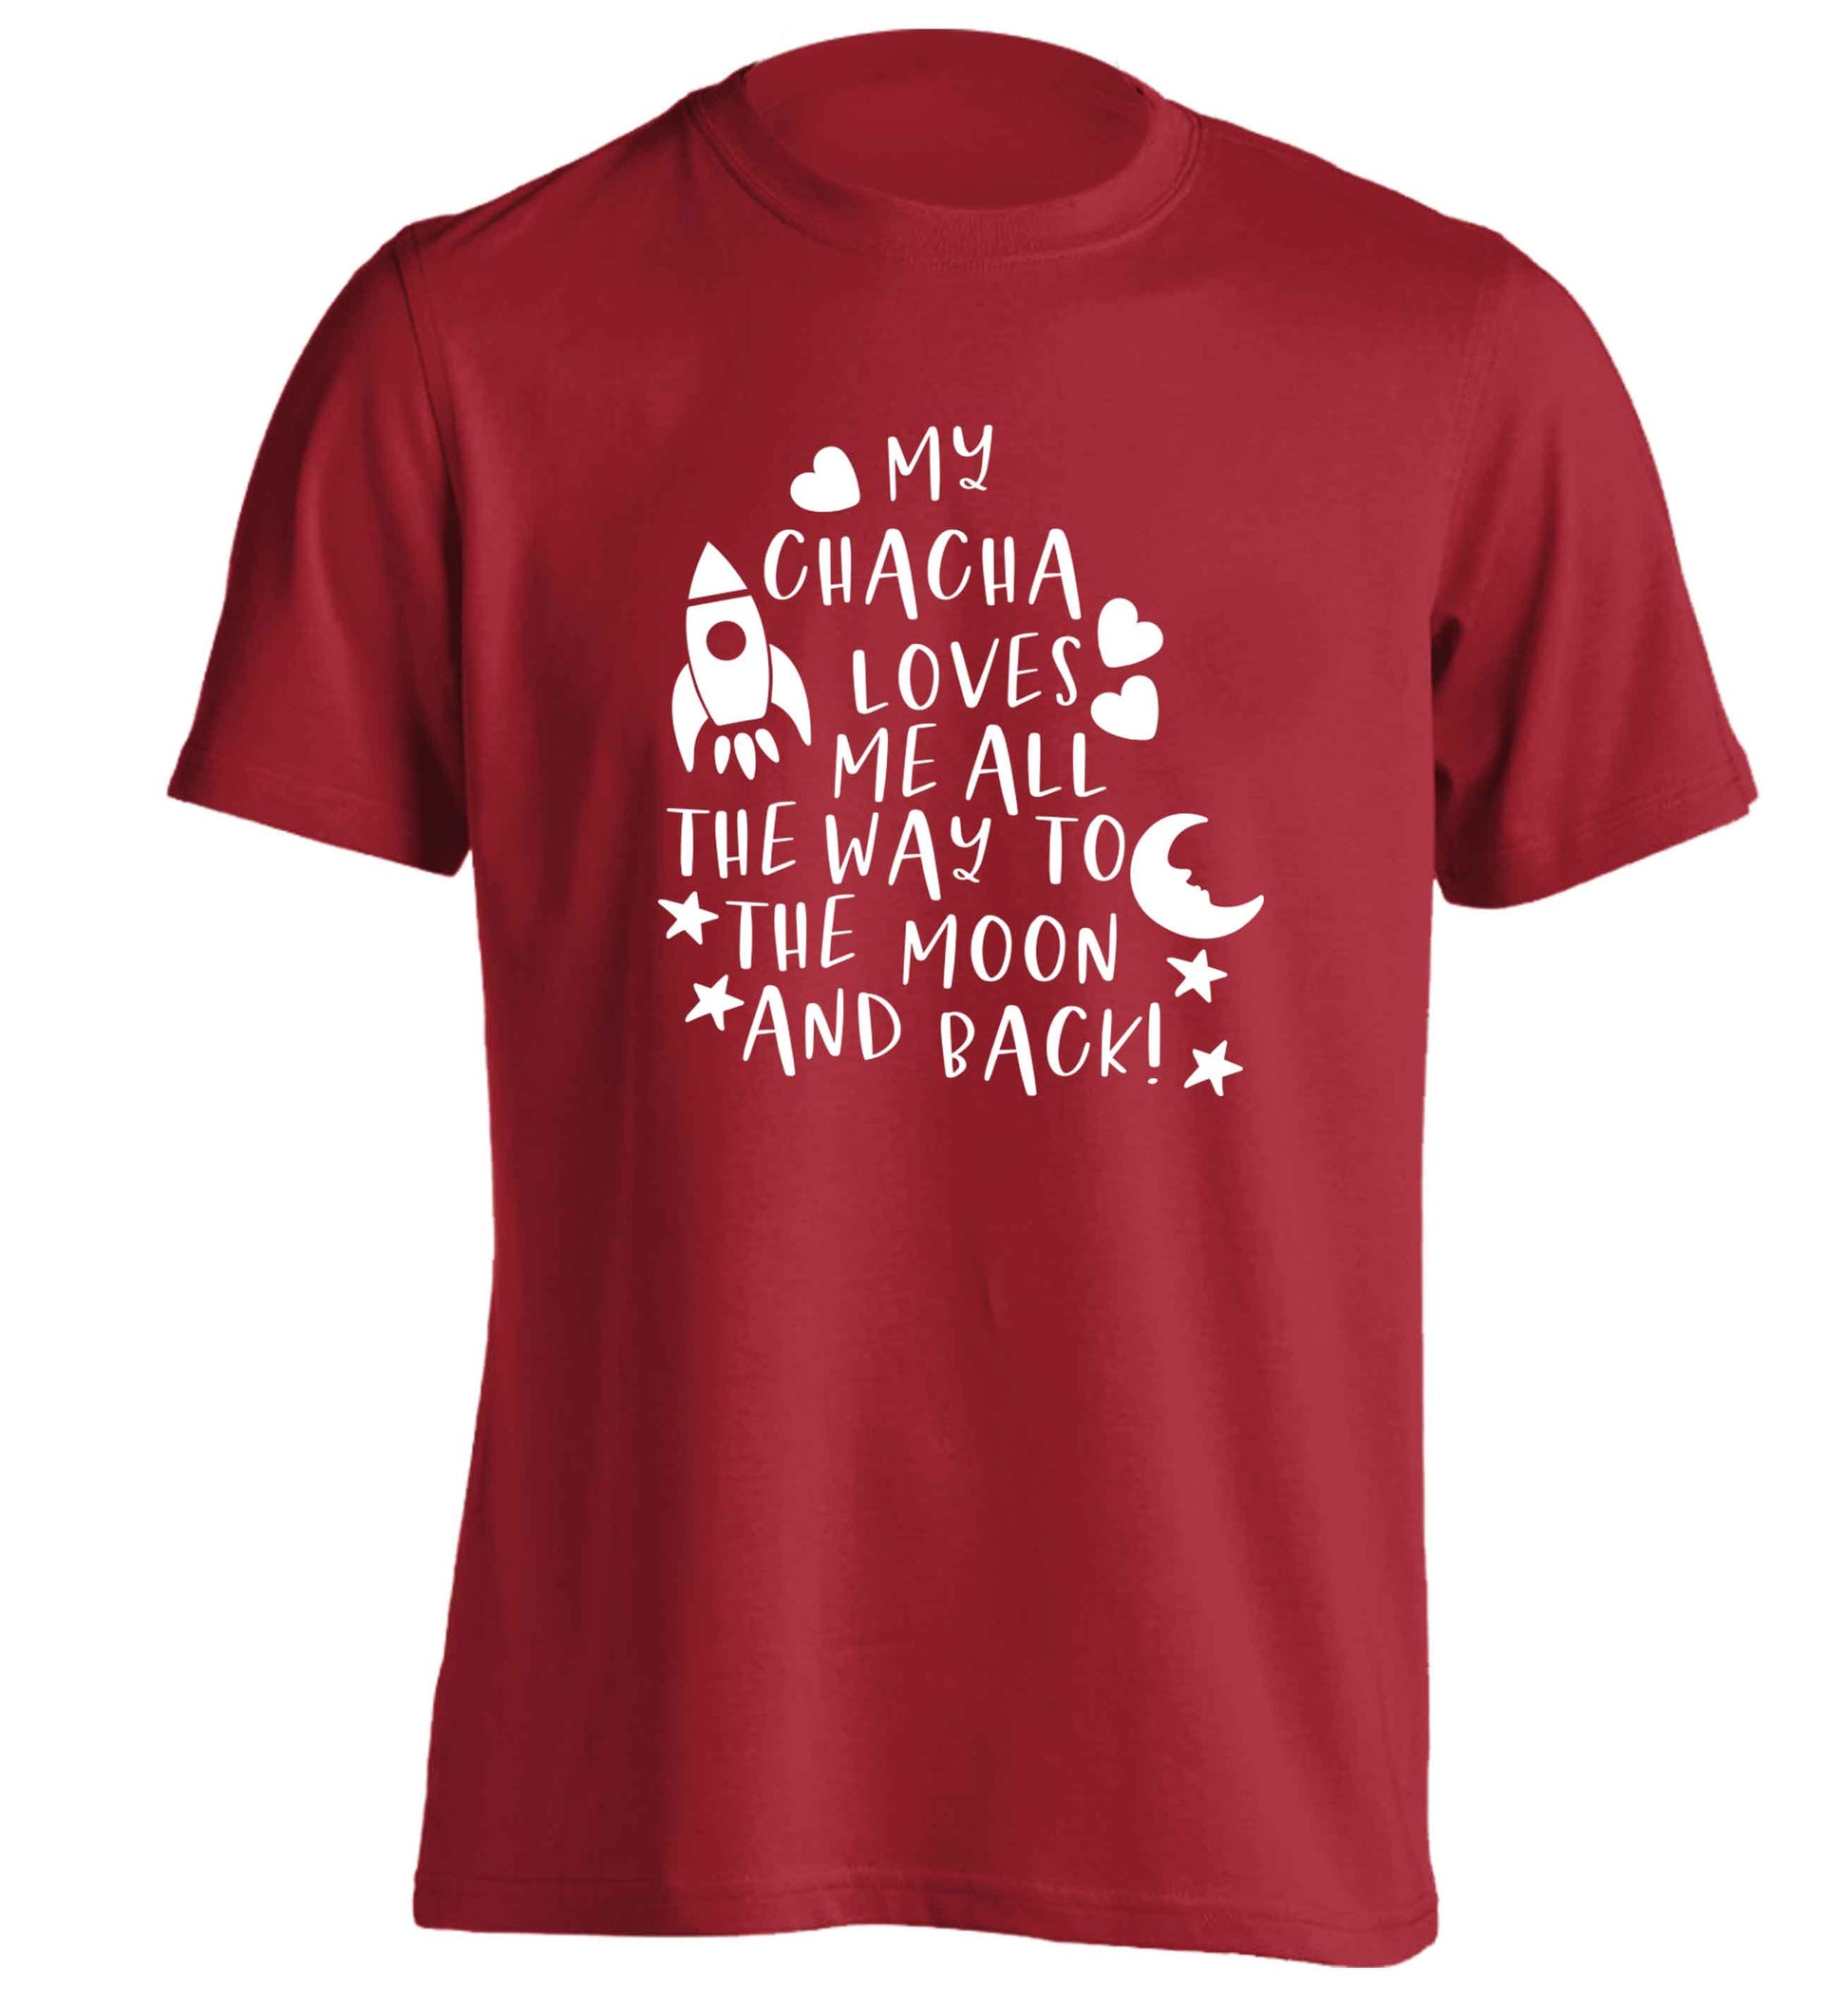 My chacha loves me all the way to the moon and back adults unisex red Tshirt 2XL